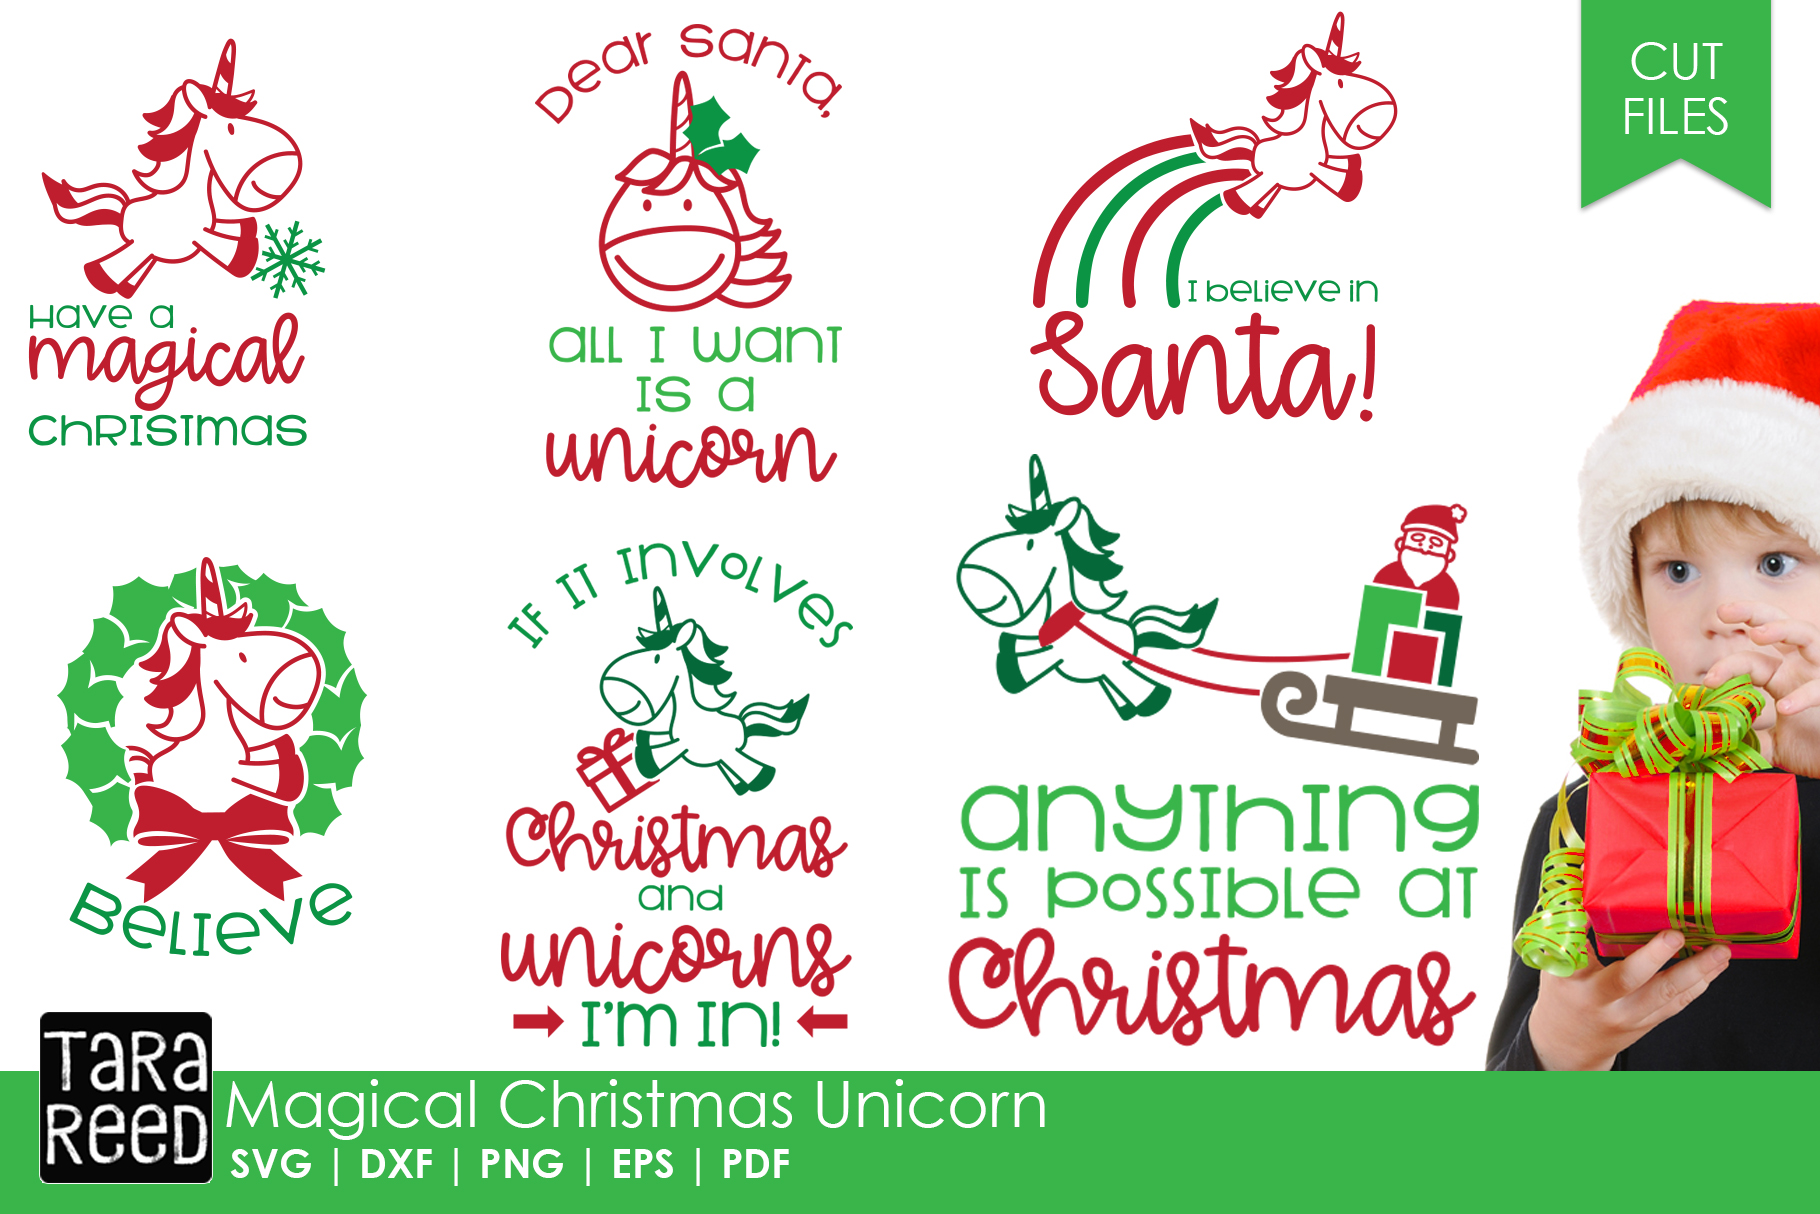 Download Magical Christmas Unicorn - Christmas SVG Files for Crafters